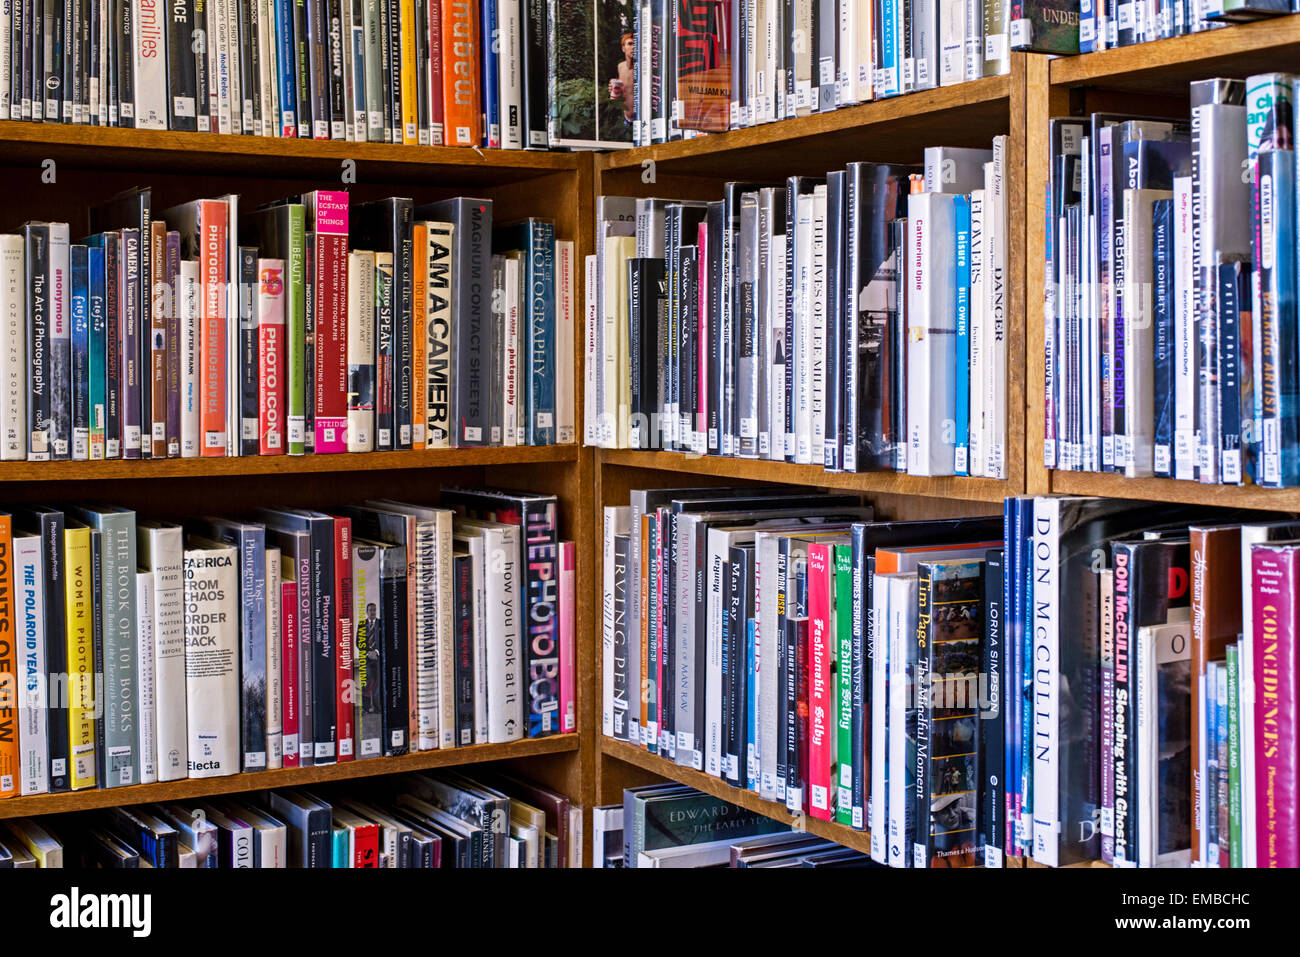 Library shelves containing books on photography. Stock Photo